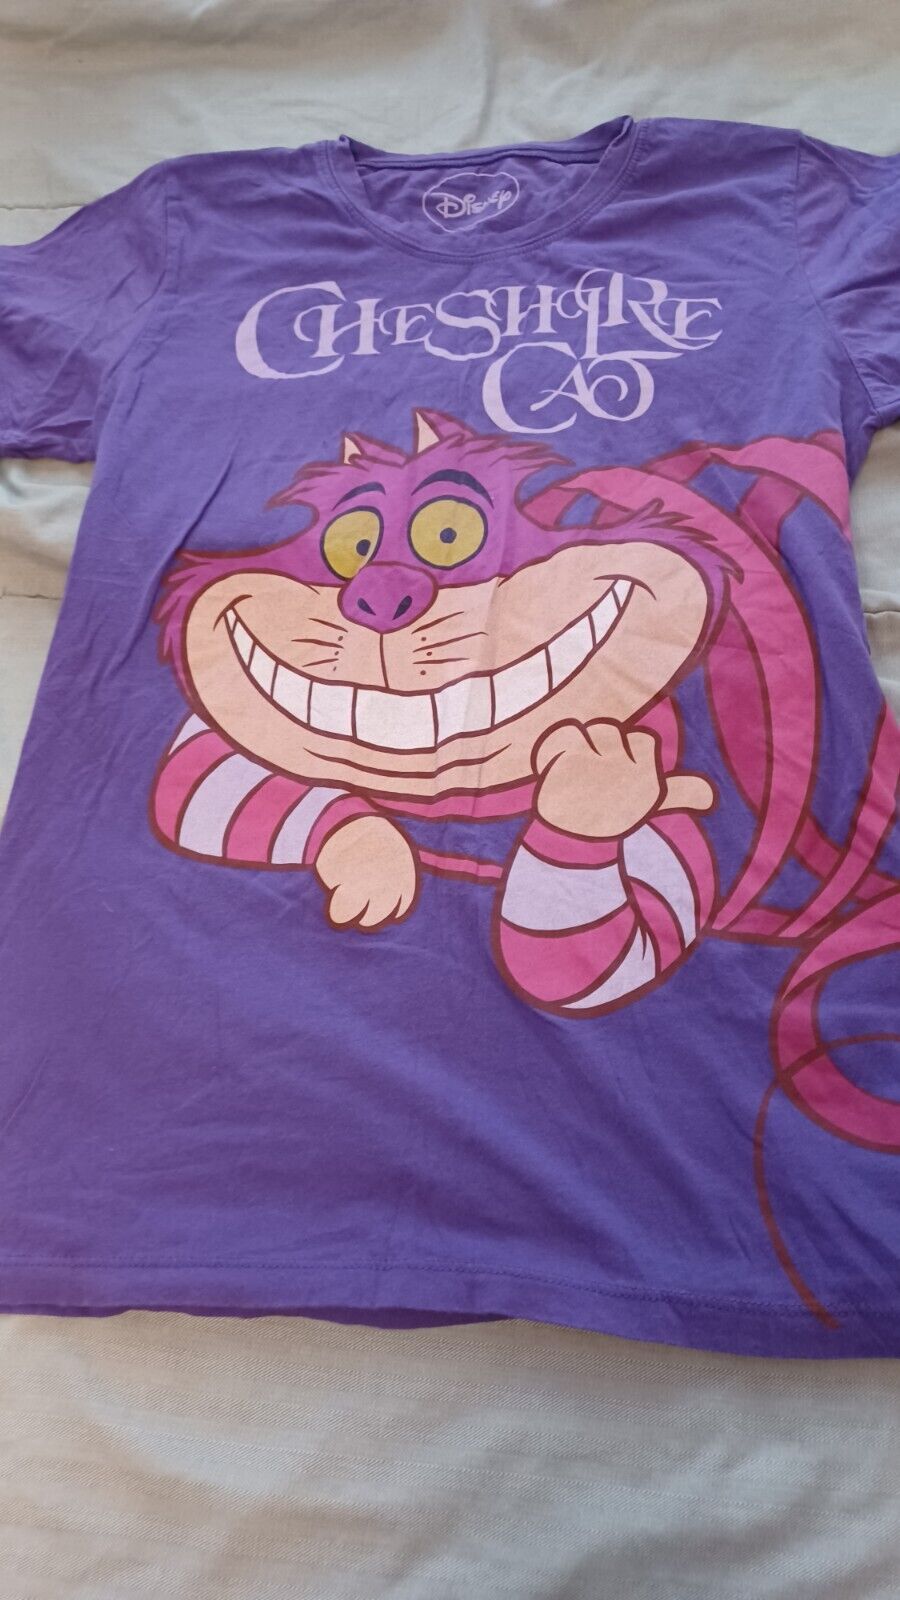 Disney Cheshire Cat Shirt Top Women's Extra Large Pink Short-Sleeve Graphic Tee